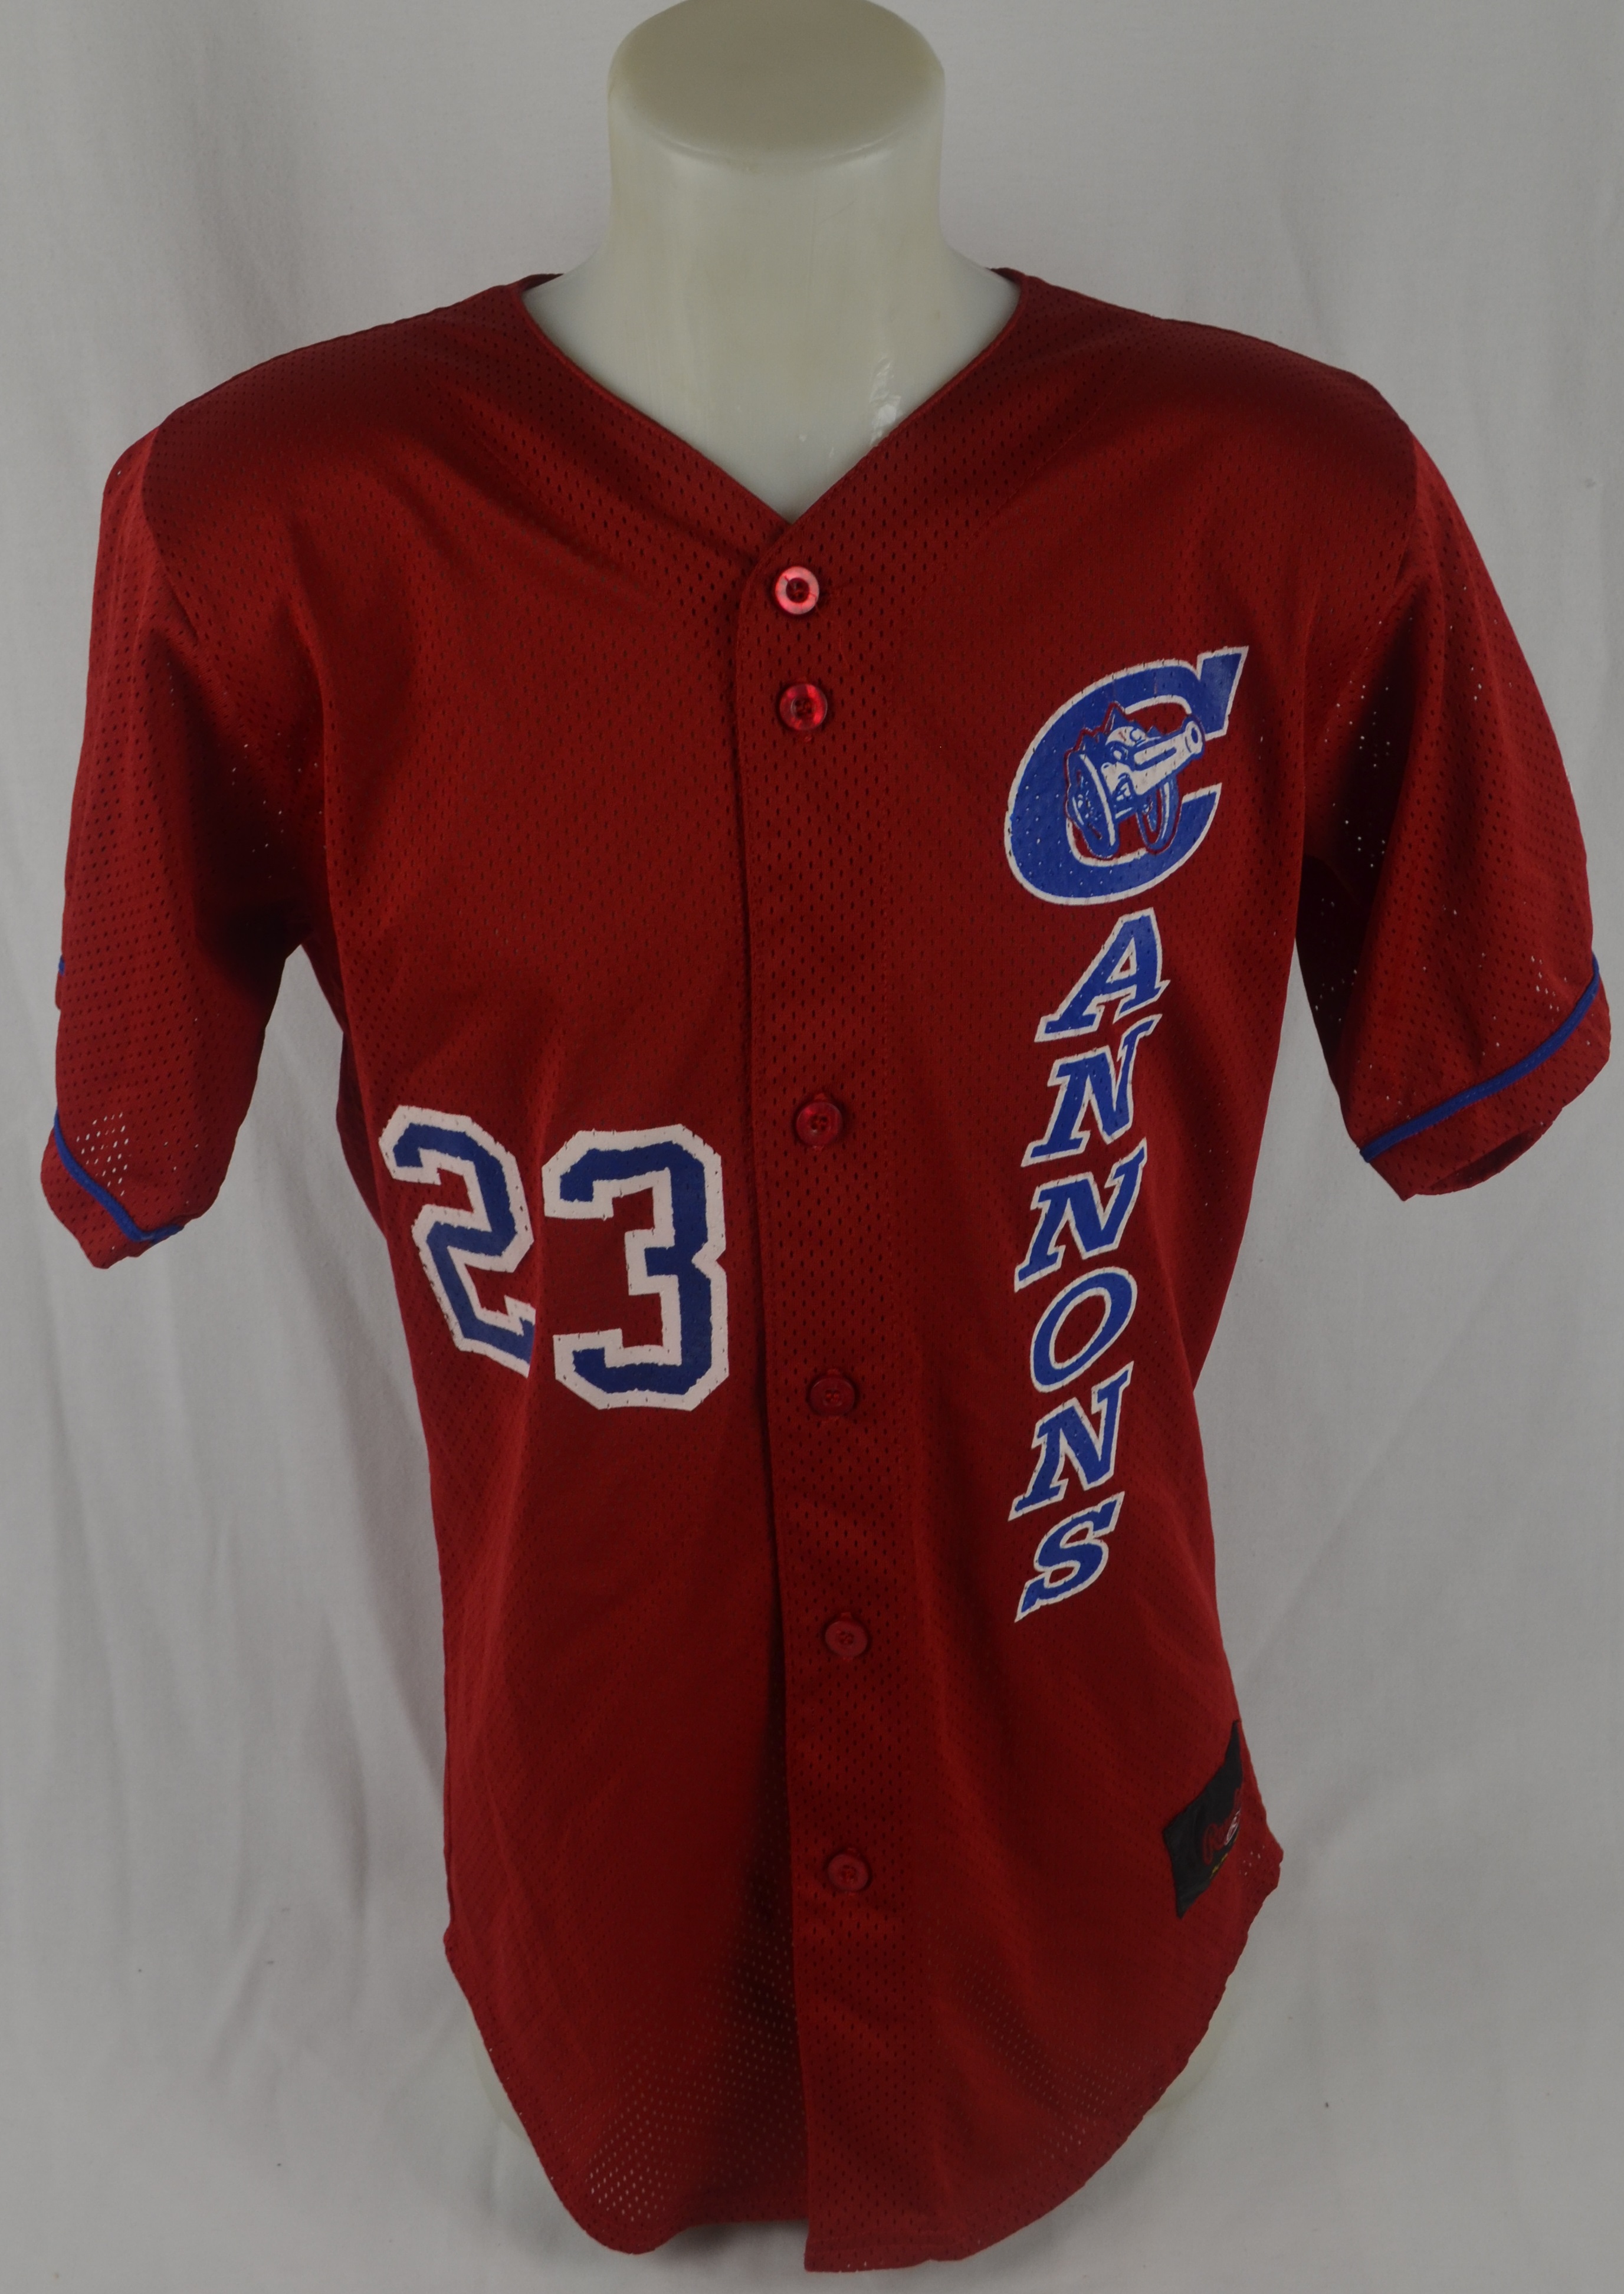 calgary cannons jersey